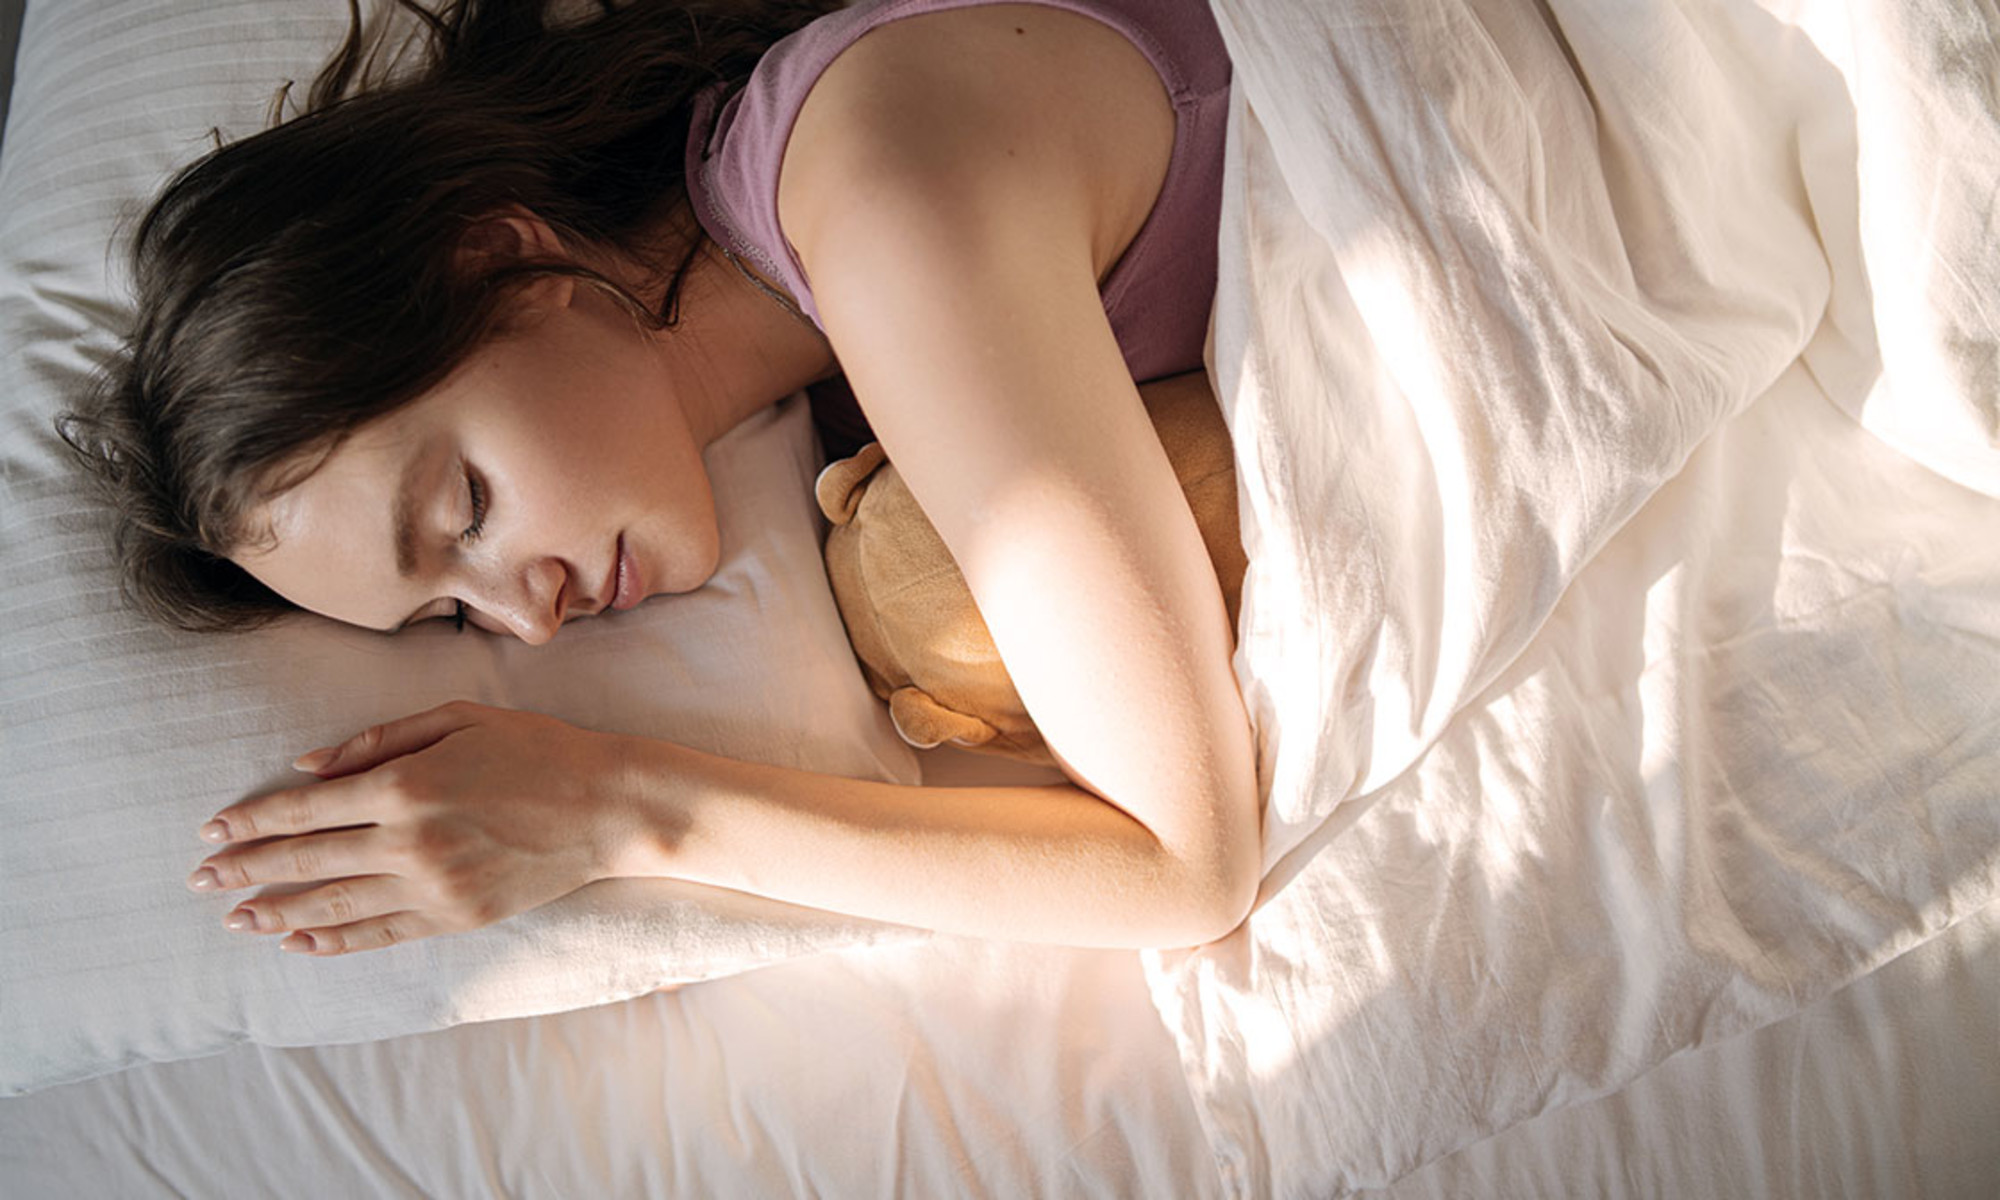 The Data Is In: This Supplement Makes It A Breeze To Get A High Sleep Score

